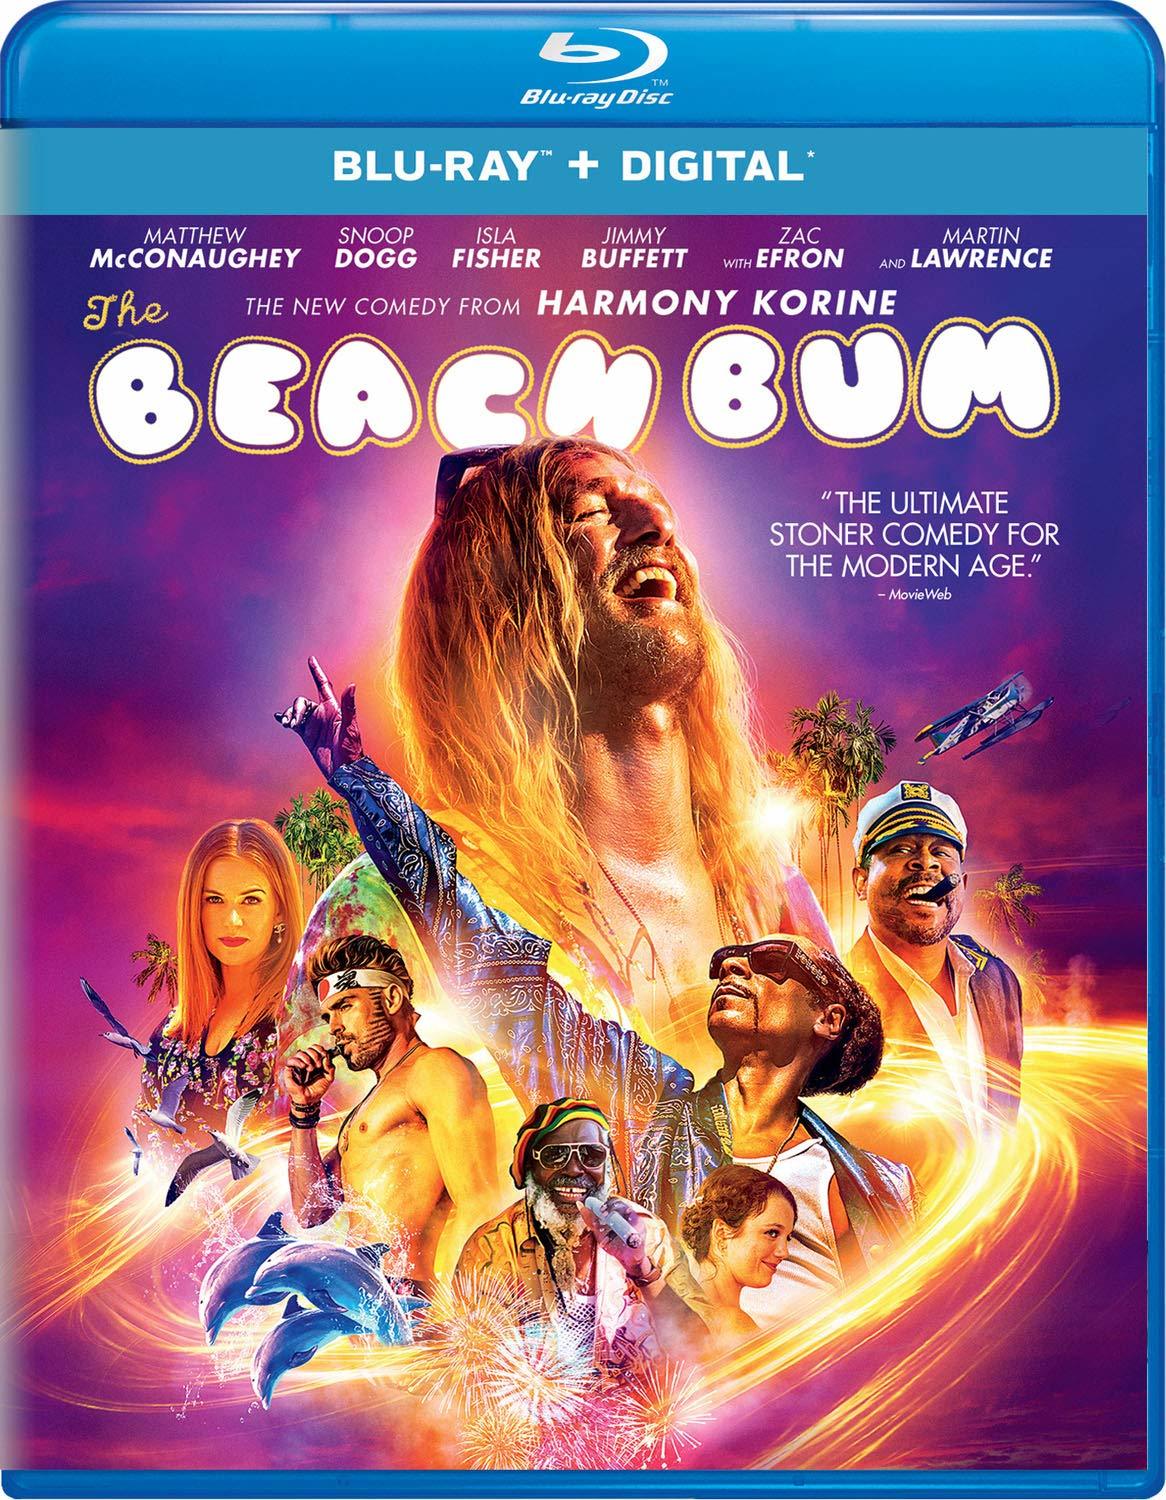 The Beach Bum, now available on Blu-ray and DVD